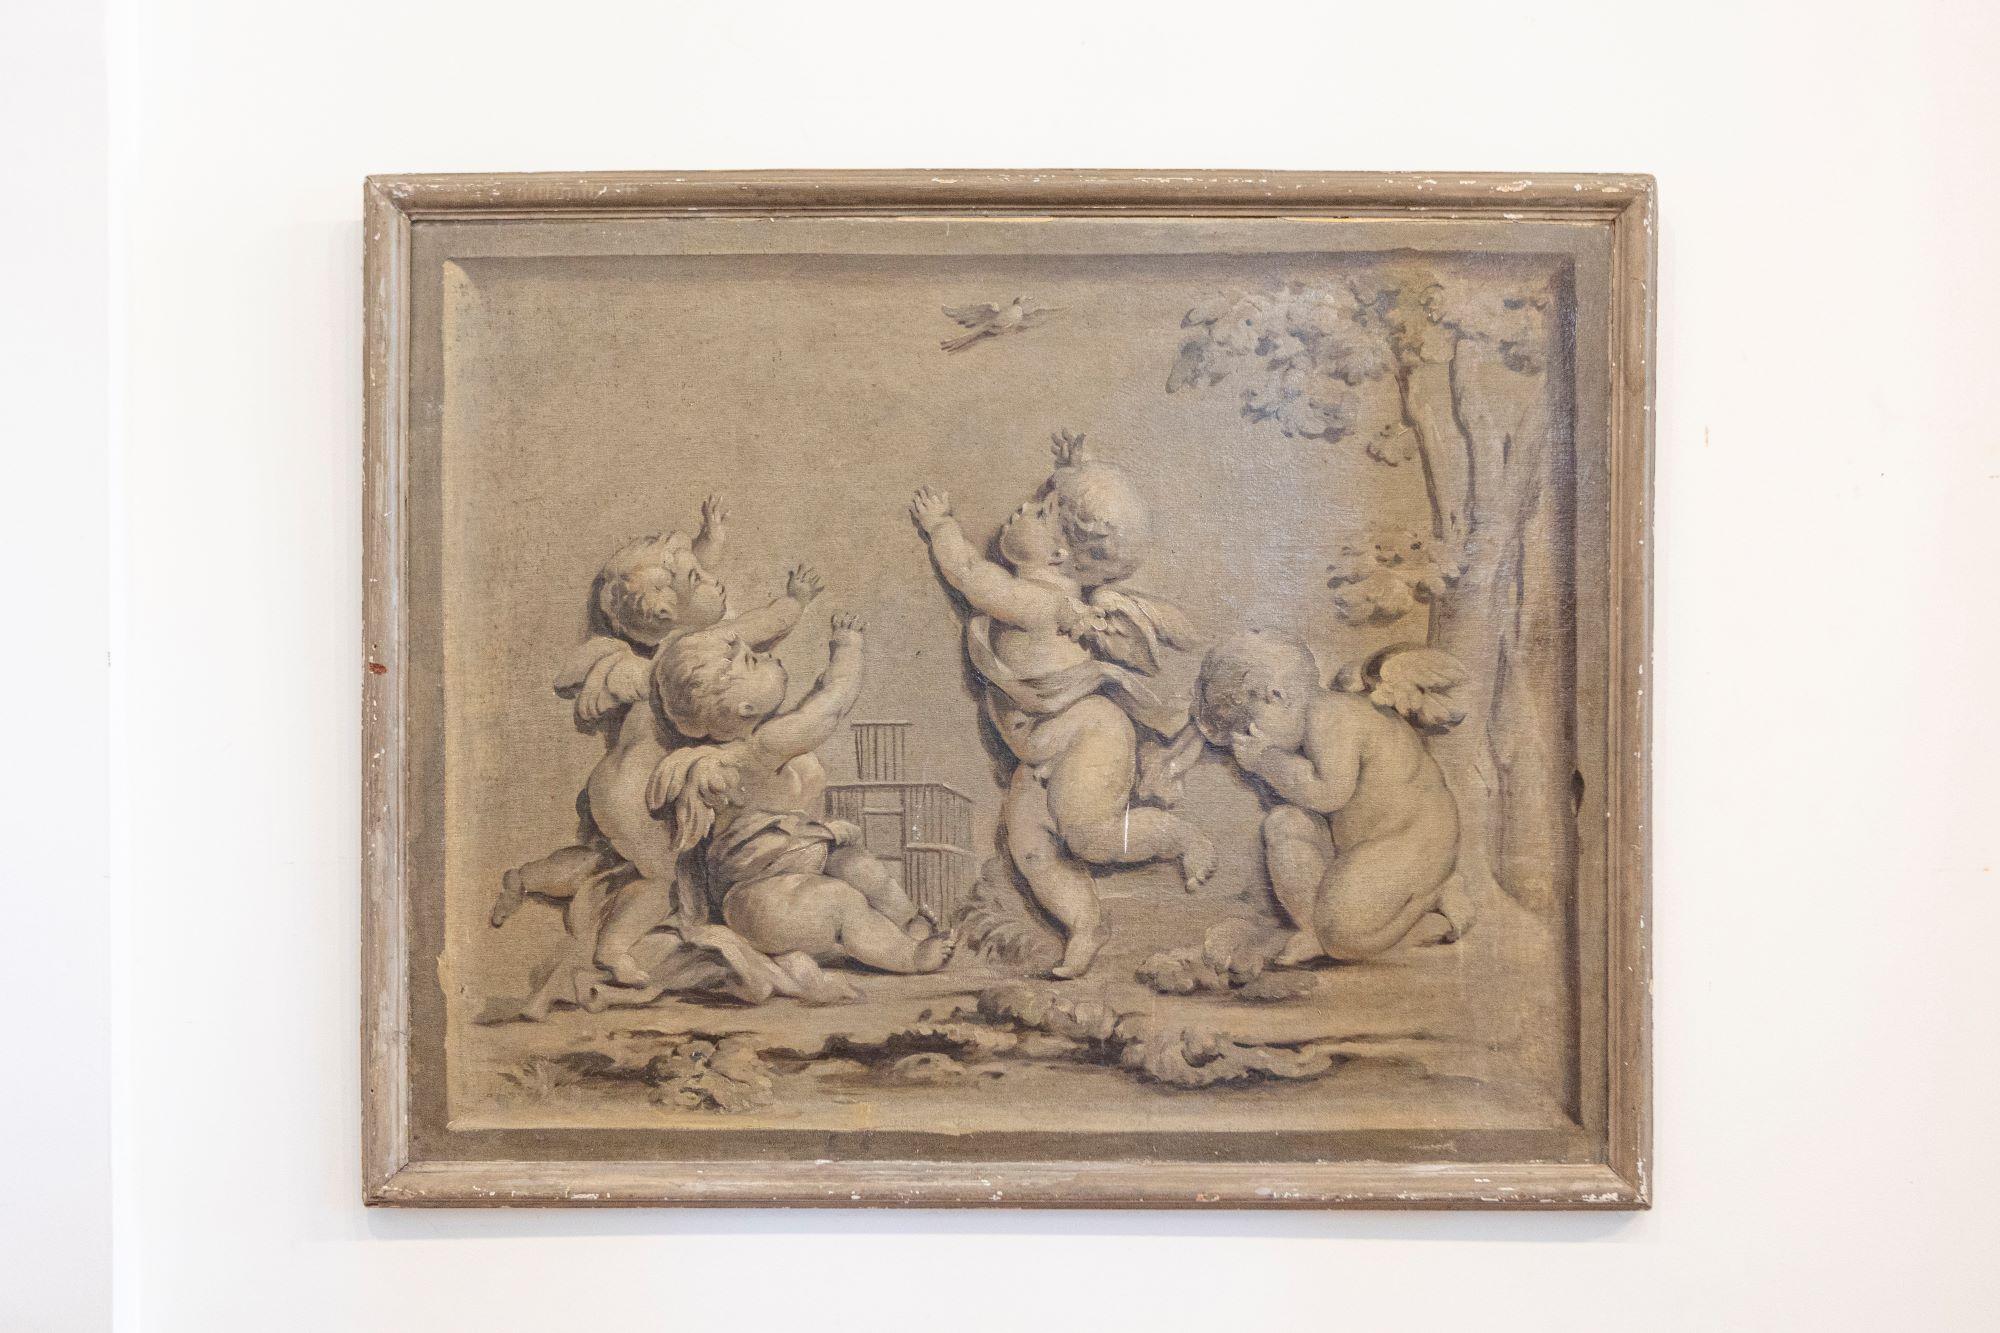 A French grisaille painting of horizontal format from the early 19th century. This French grisaille painting features a scene reminiscent of French sculptor Jean-Baptiste Pigalle's 1750s 'Infant with a Cage'. Three chubby cherubs surrounding an